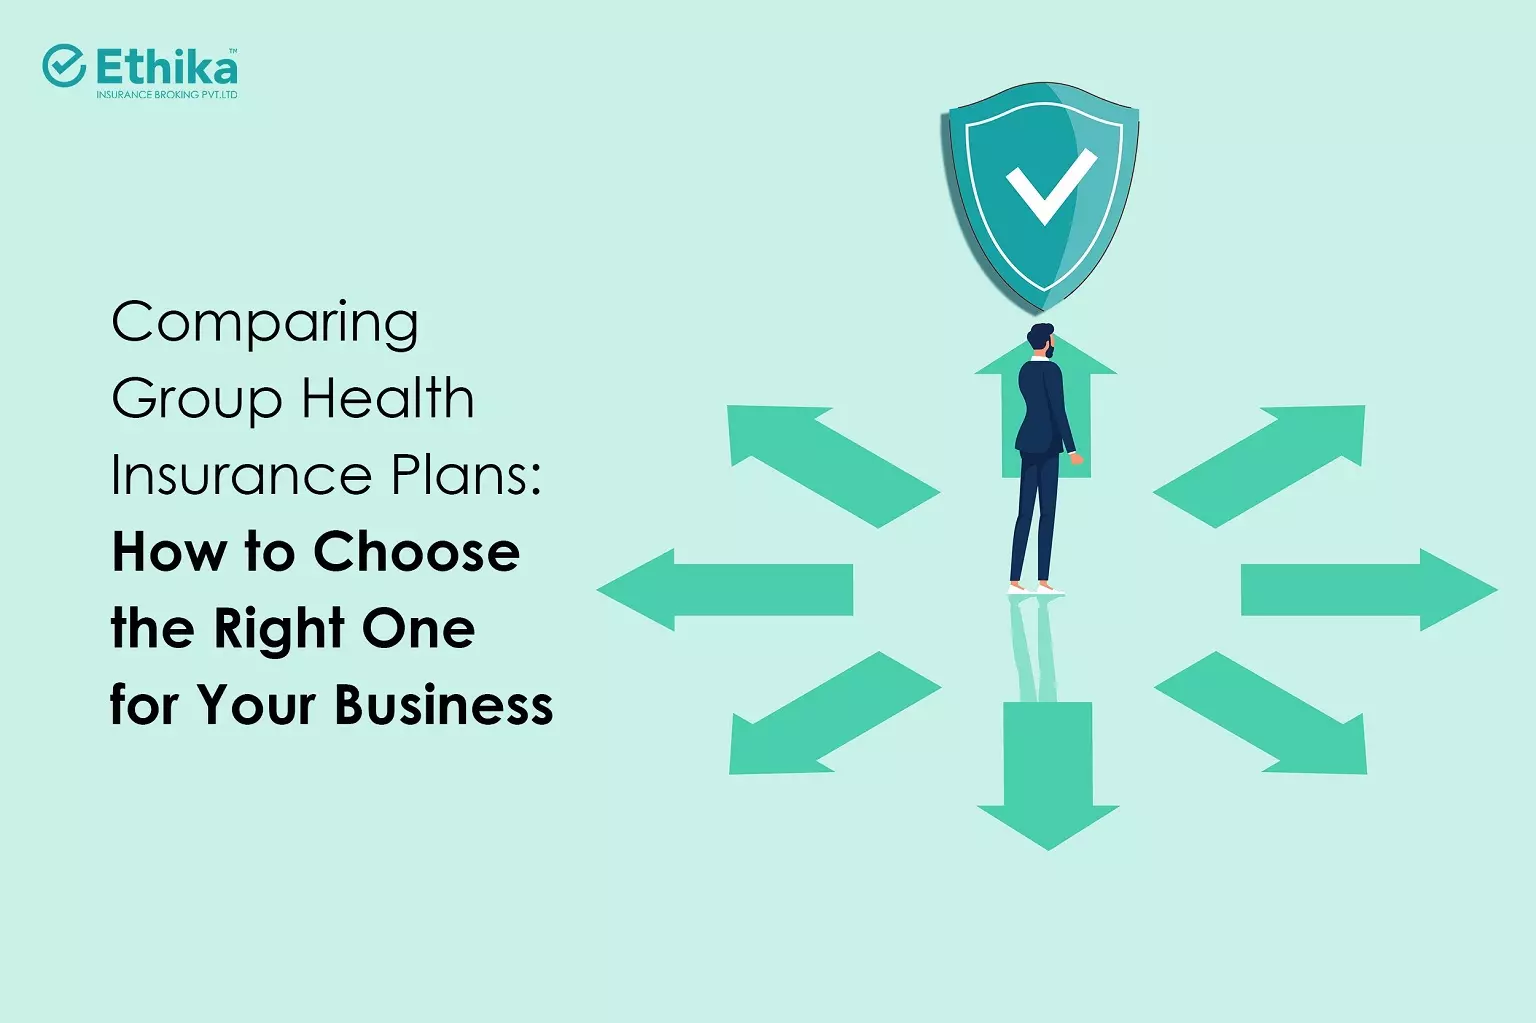 Comparing Group Health Insurance Plans: How to Choose the Right One for Your Business